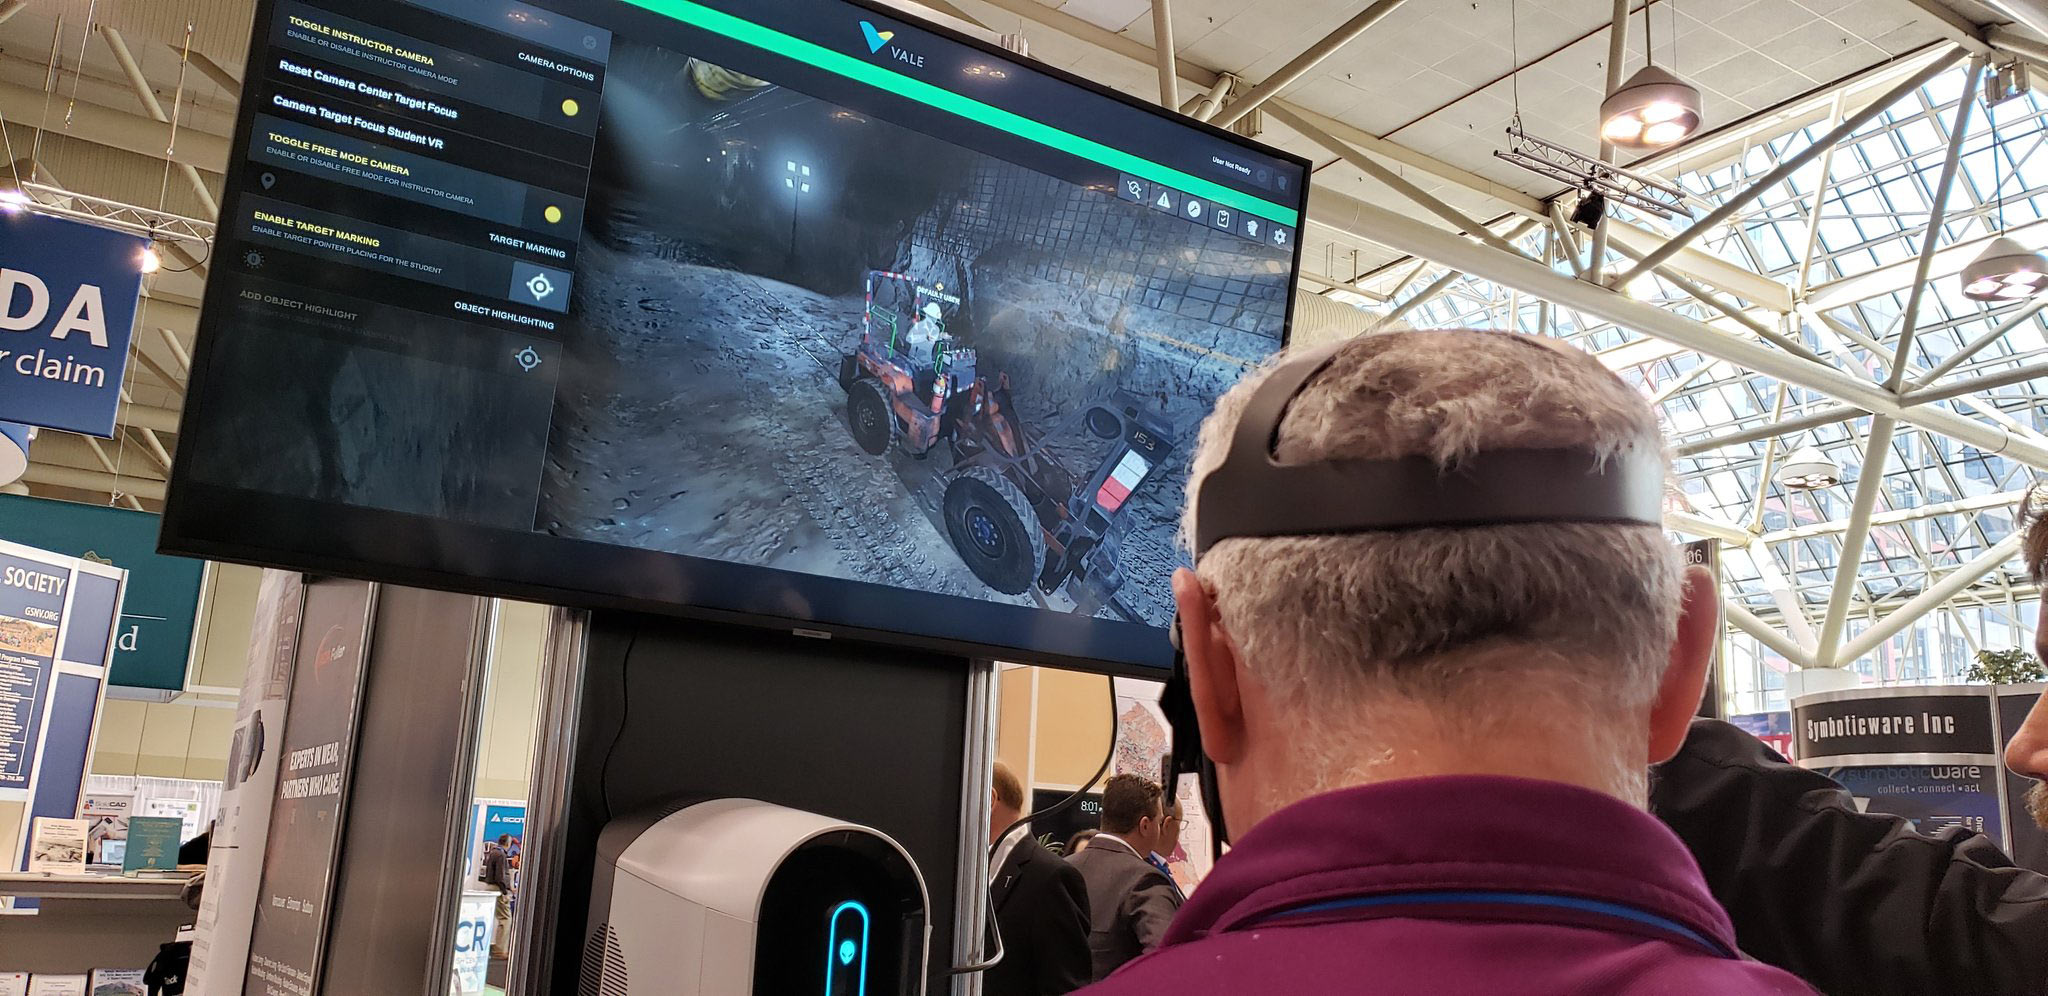 PDAC 2020 - NORCAT debuts Vale VR Training at the Northern Ontario Mining Showcase